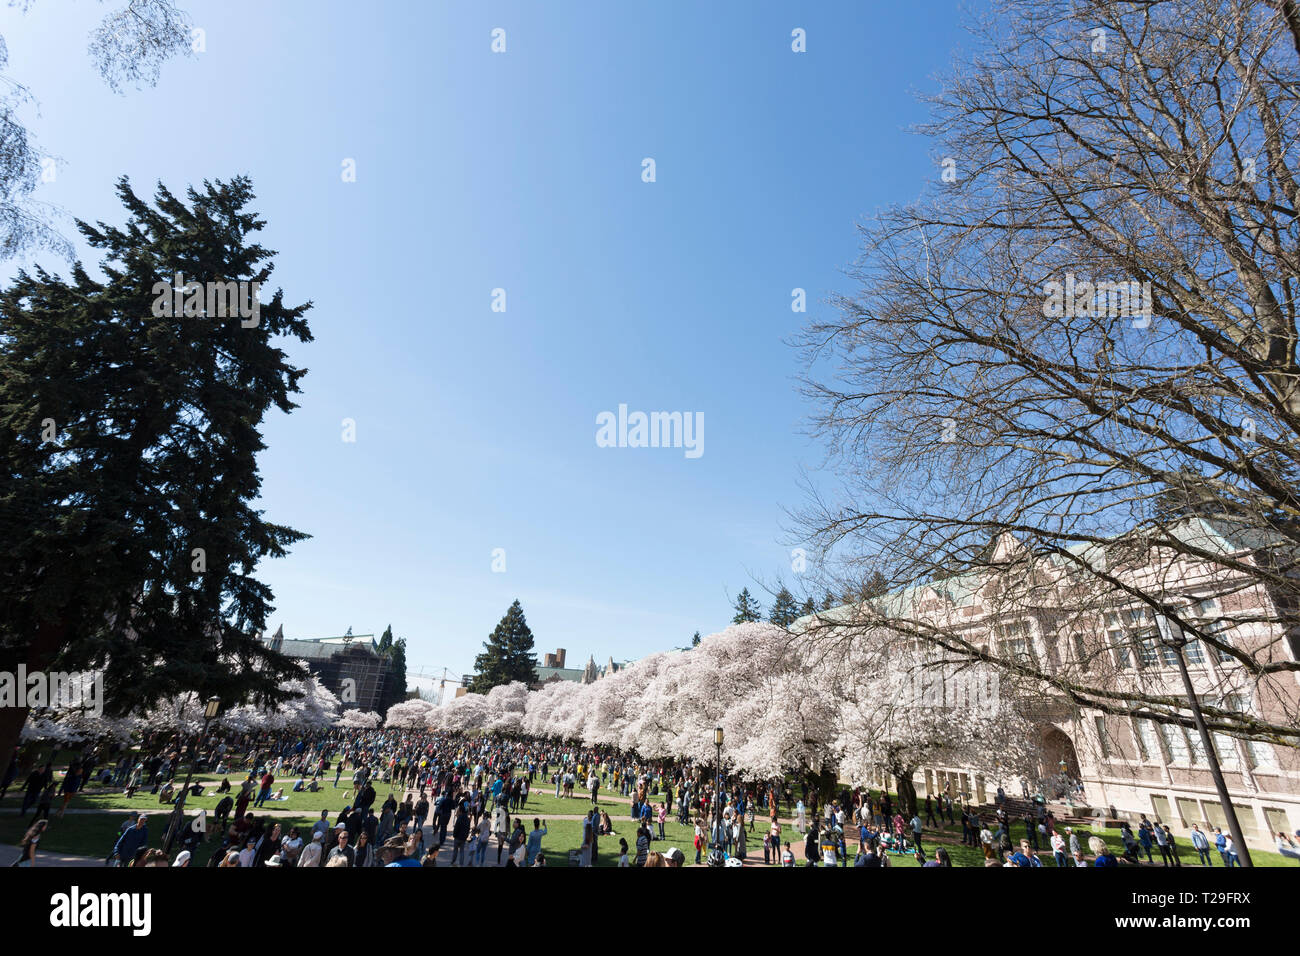 Seattle, Washington: Thousands of visitors gather at the University of Washington Quad as the cherry trees reach peak bloom. Initially planted at the Washington Park Arboretum in 1939, the thirty Yoshino cherry trees were moved onto the Liberal Arts Quadrangle in 1962 where they draw visitors from all over the world each spring. Credit: Paul Christian Gordon/Alamy Live News Stock Photo